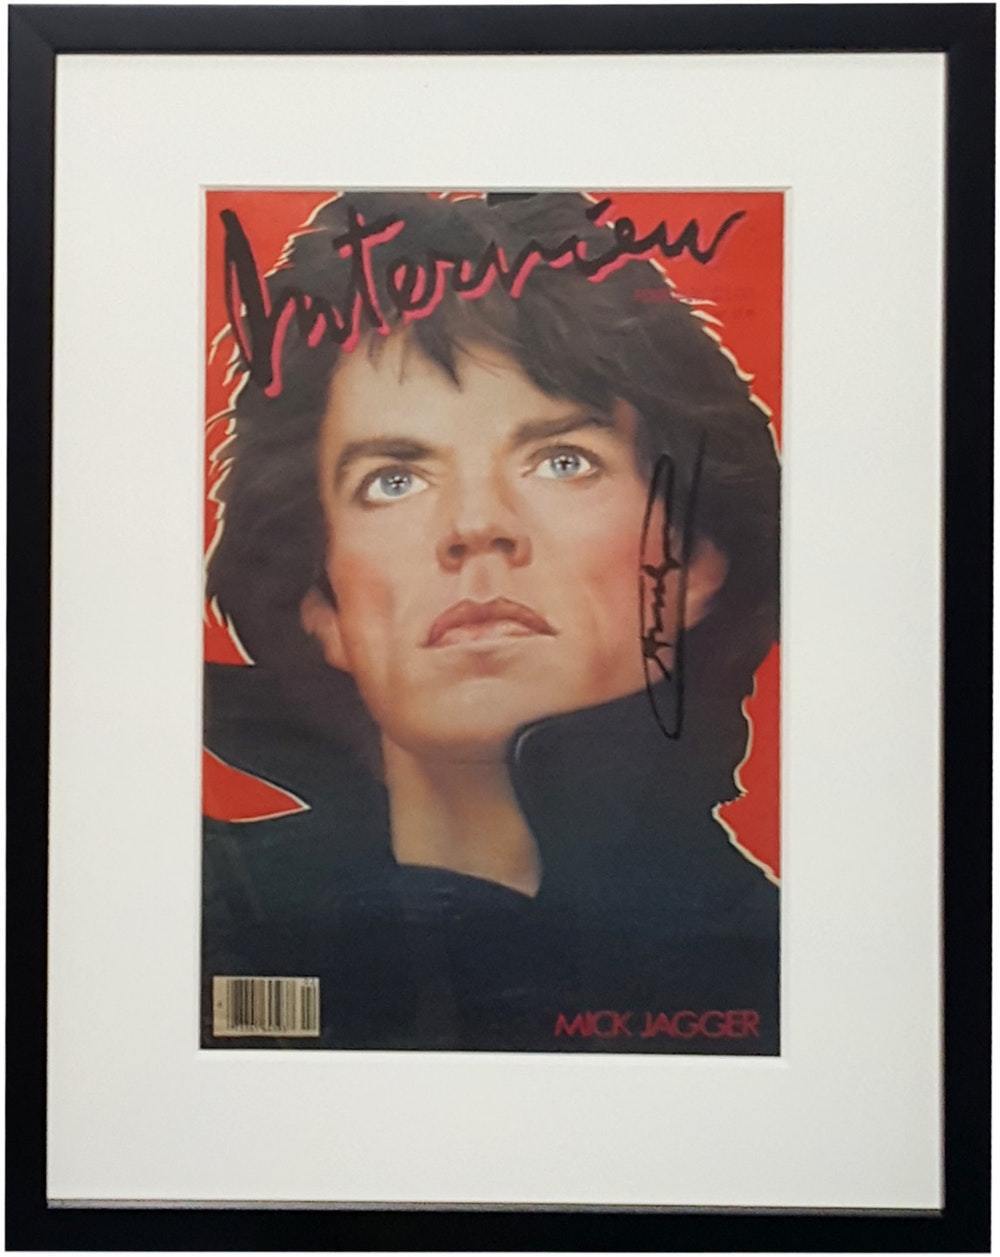 Interview Magazine (Mick Jagger Cover), February 1985 Enlarged